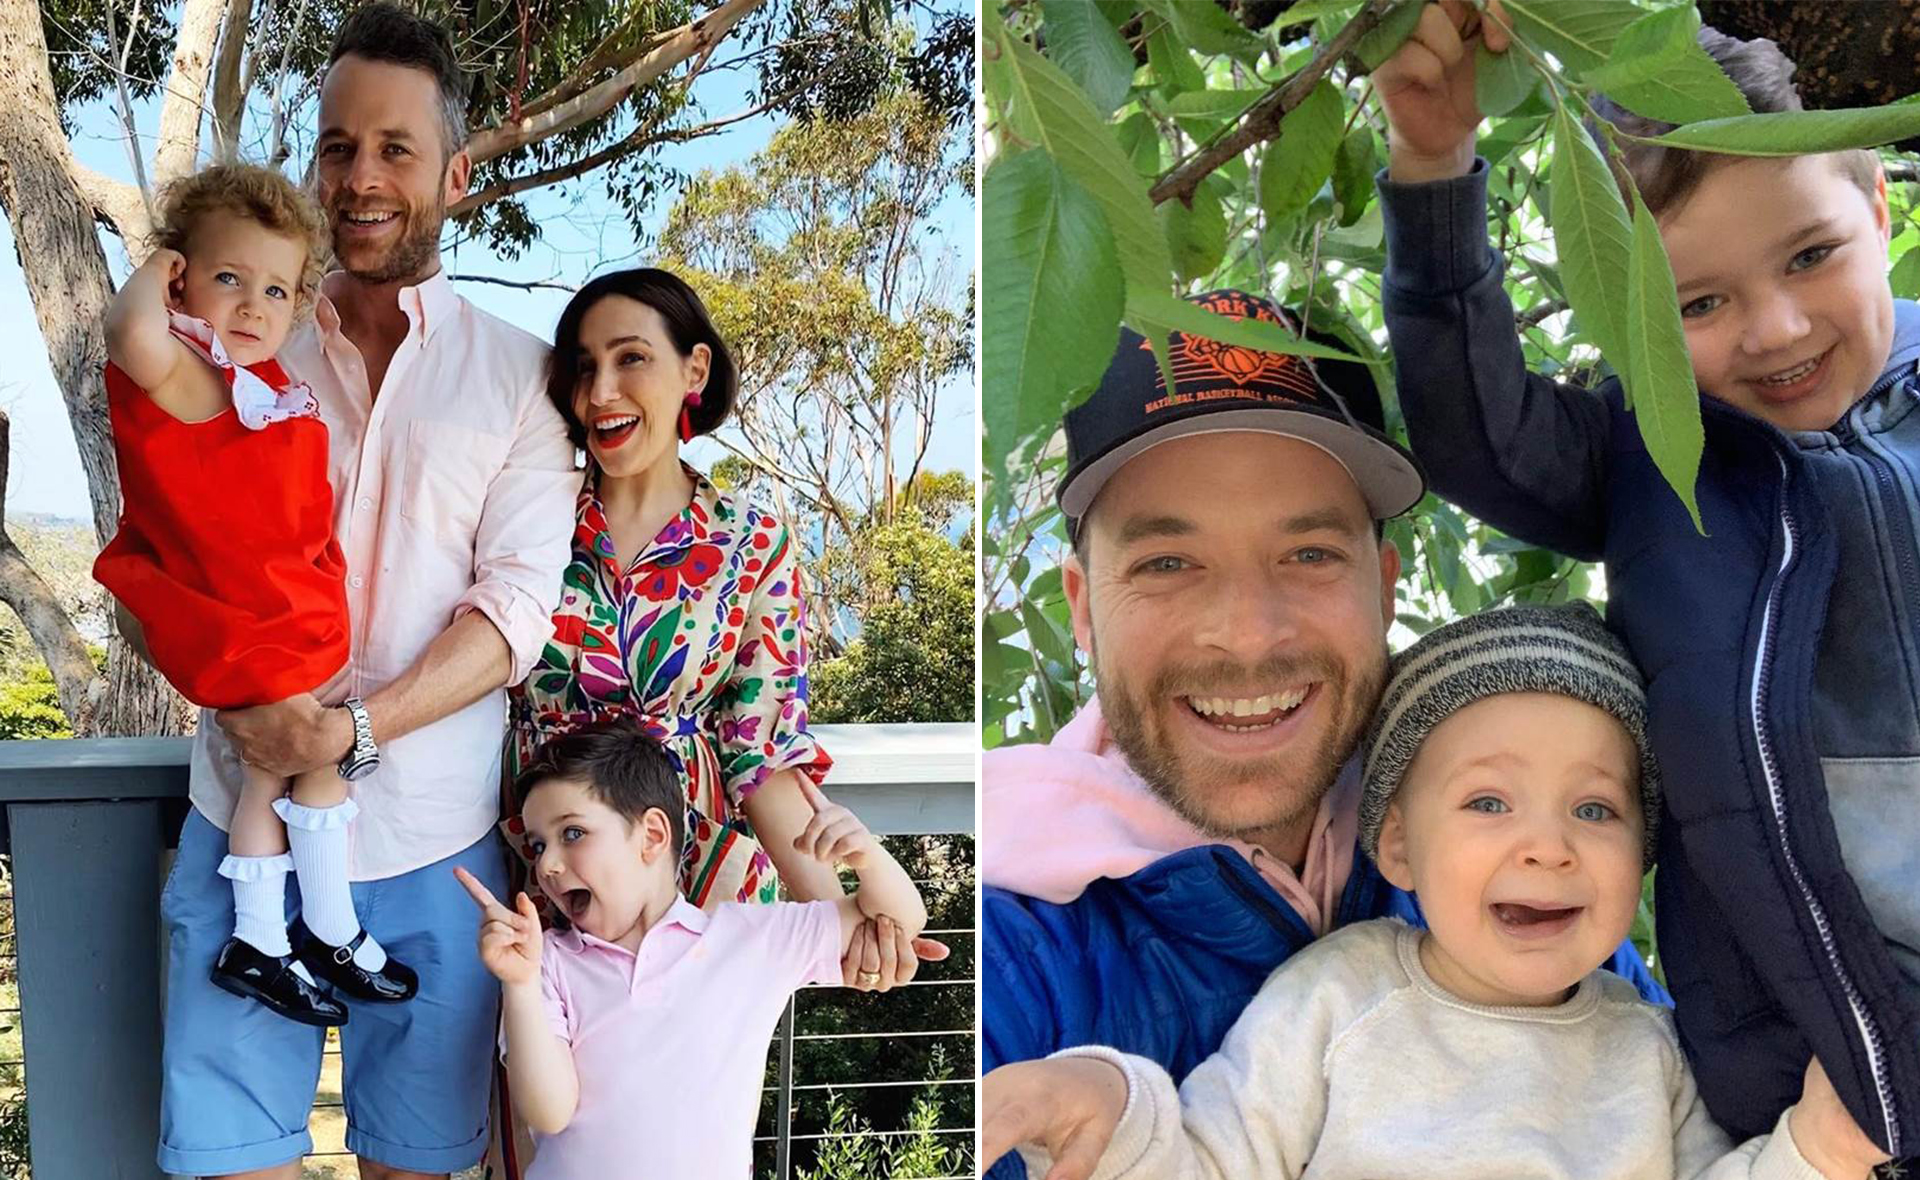 Hamish Blake and Zoë Foster Blake’s family photos prove they’re the coolest celebrity parents on the block